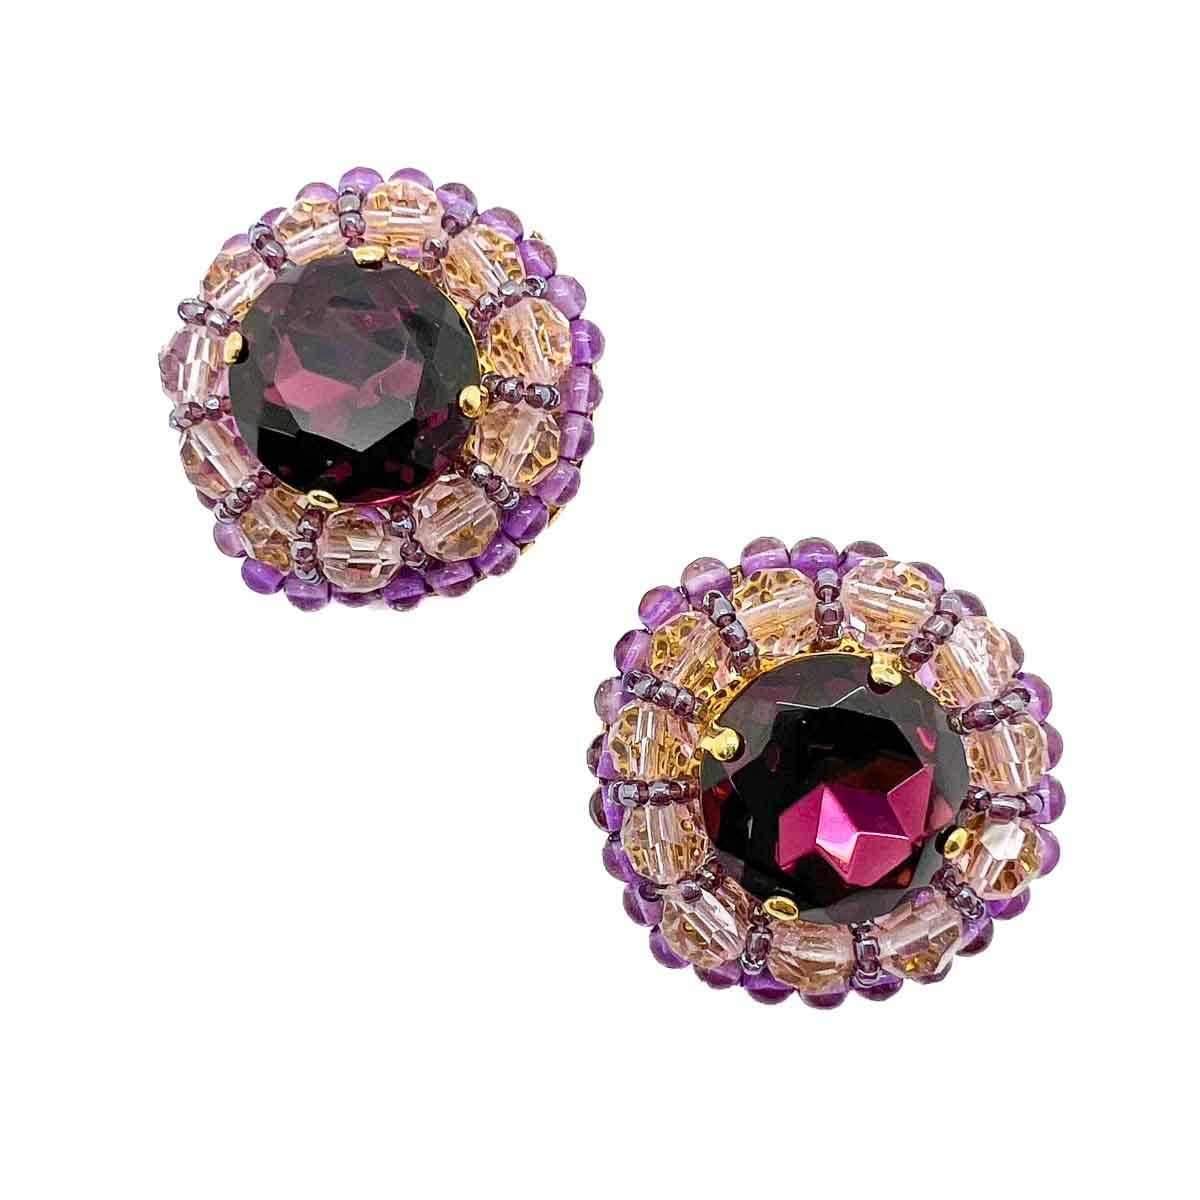 Vintage Grand Amethyst Crystal Galleried Earrings 1960s In Good Condition For Sale In Wilmslow, GB